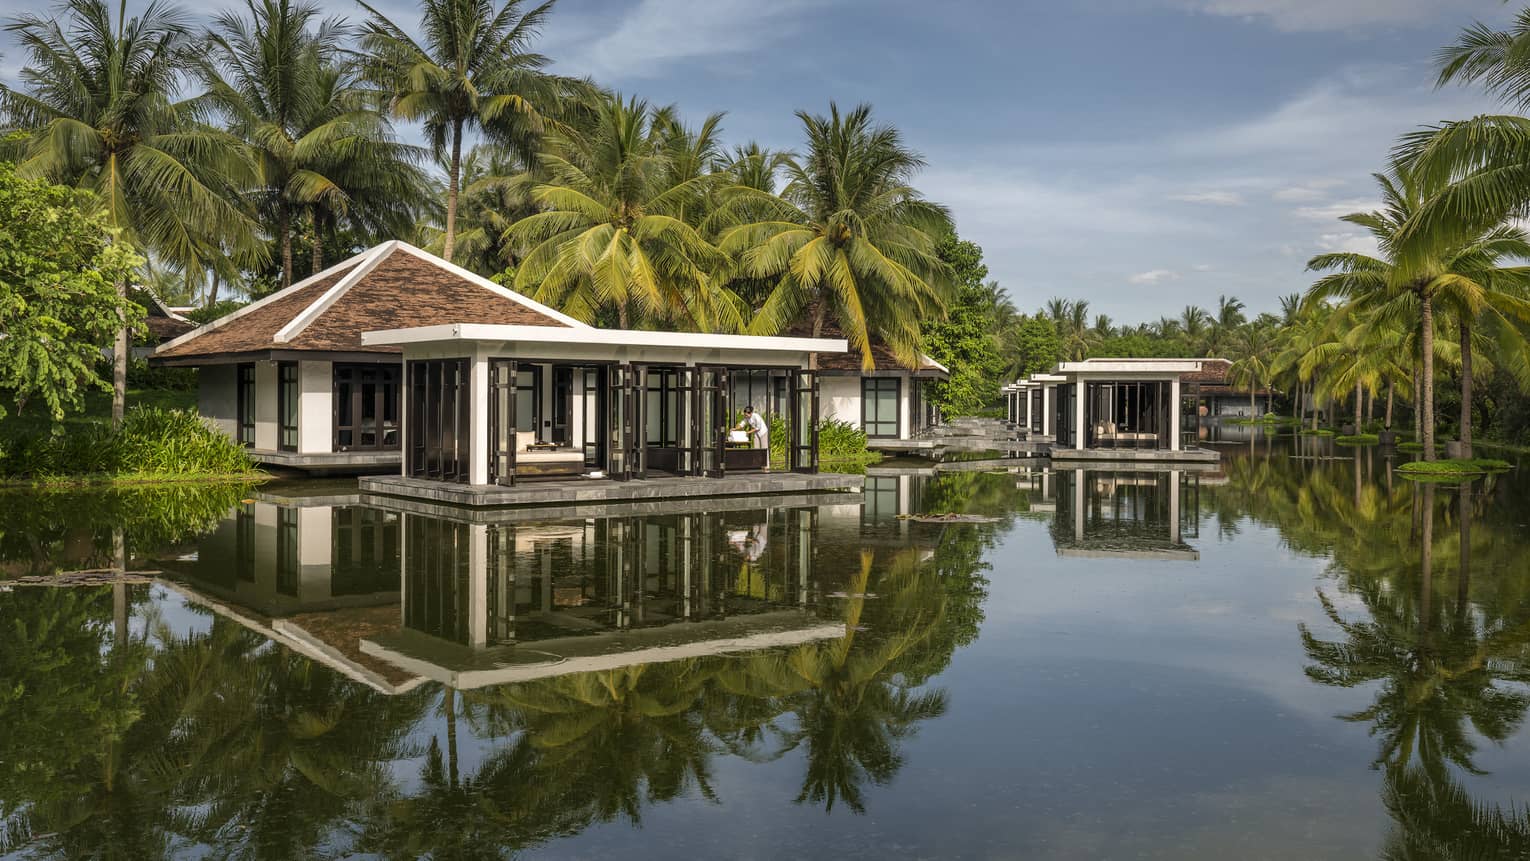 Overwater Heart of Earth spa villa staff folds white towels on deck, reflection in water